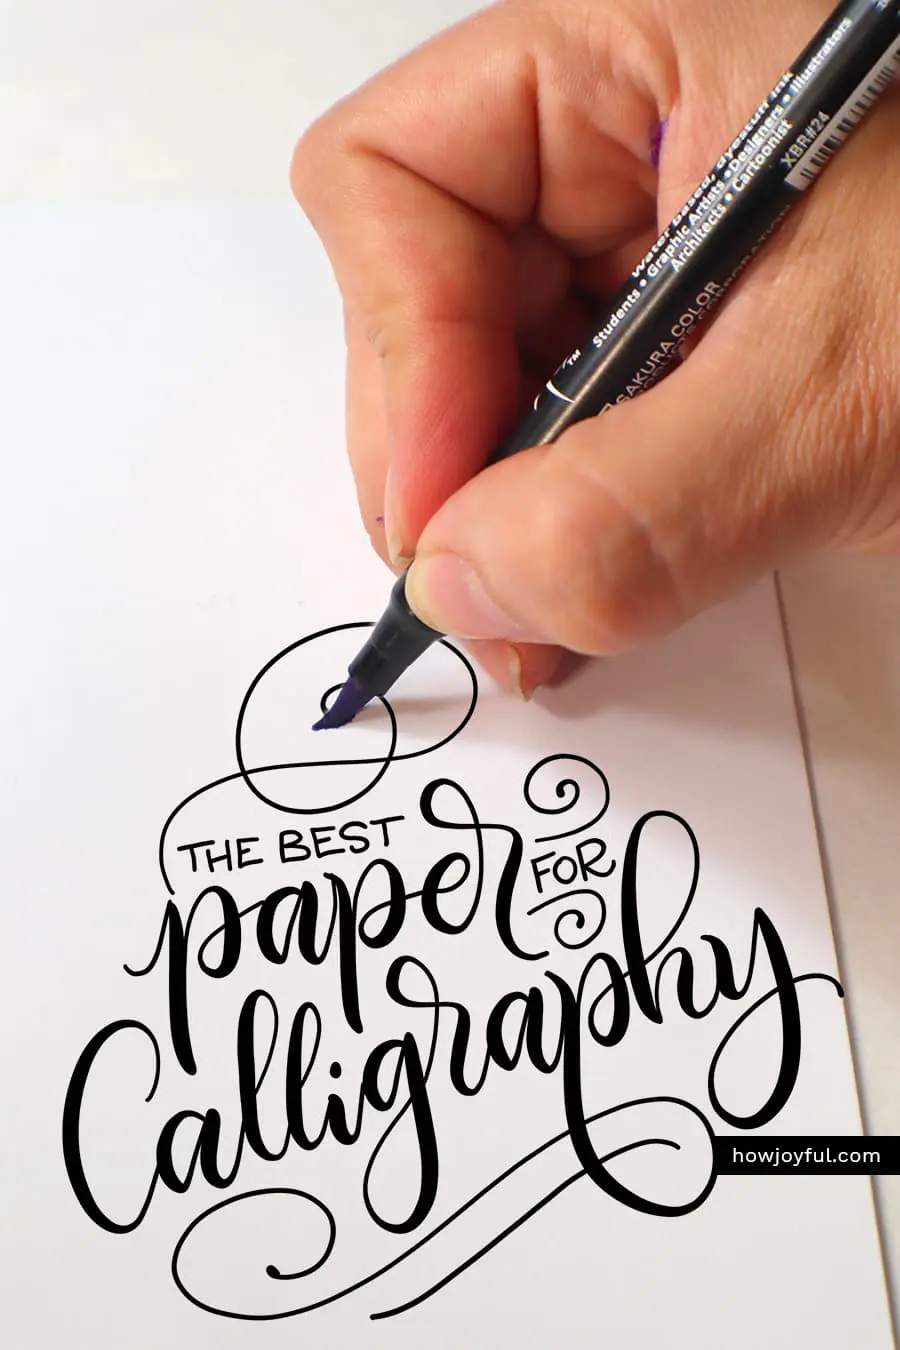 Beautiful word tracing practice - FREE brush lettering worksheet - Modern  Calligraphy Kits and Classes, Calligraphy Inks